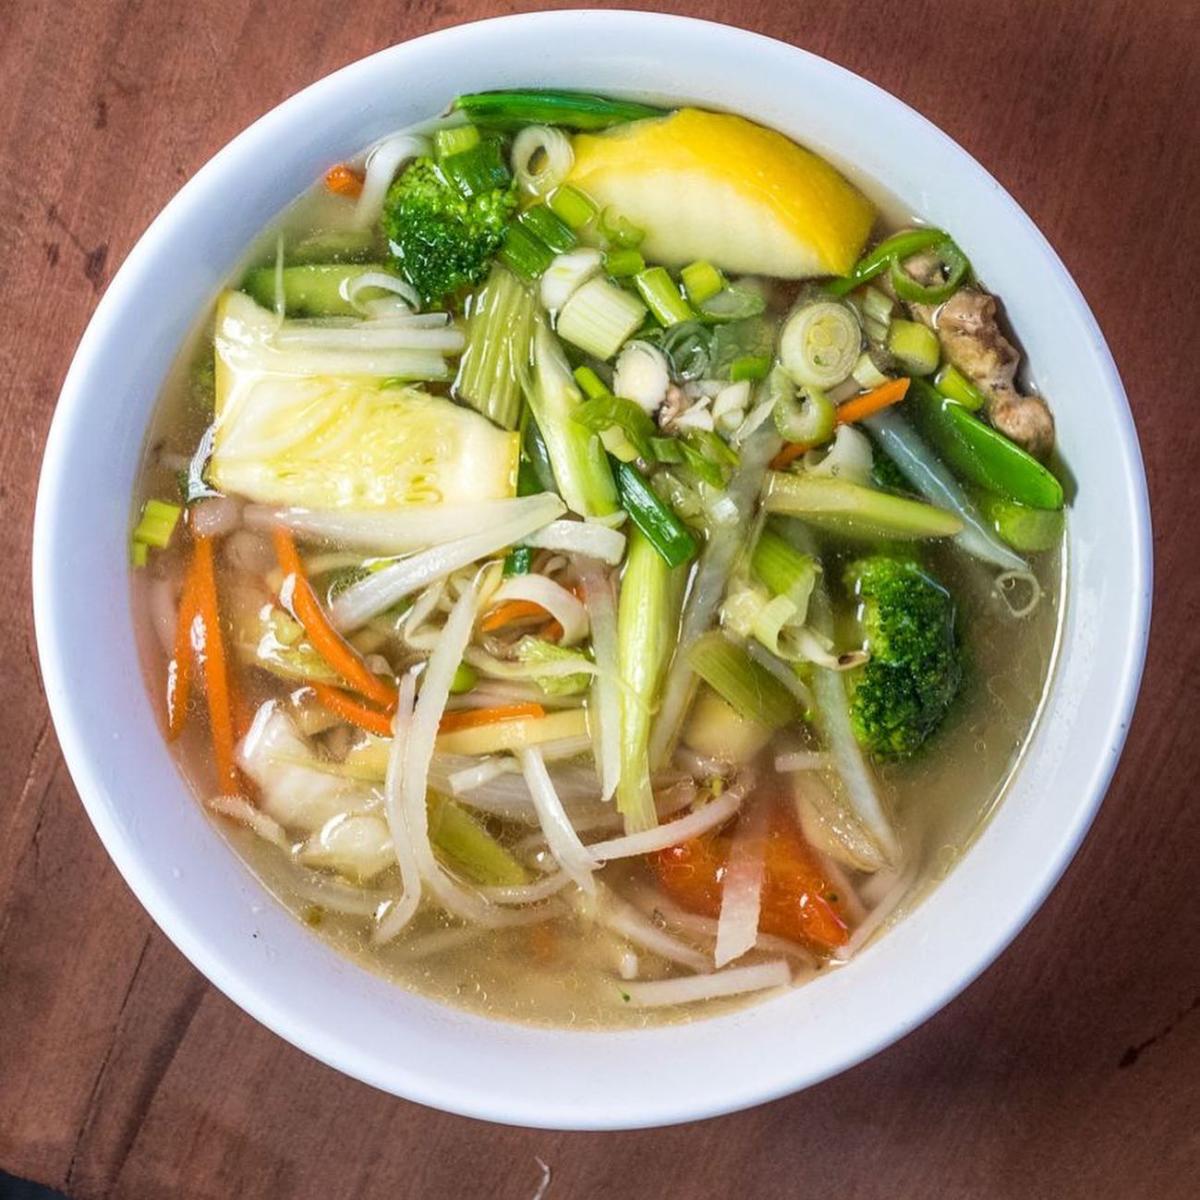 The image is a white bowl with Buddha Delight Noodle Soup with is noodle soup with green onions, celery, carrots and broccoli.